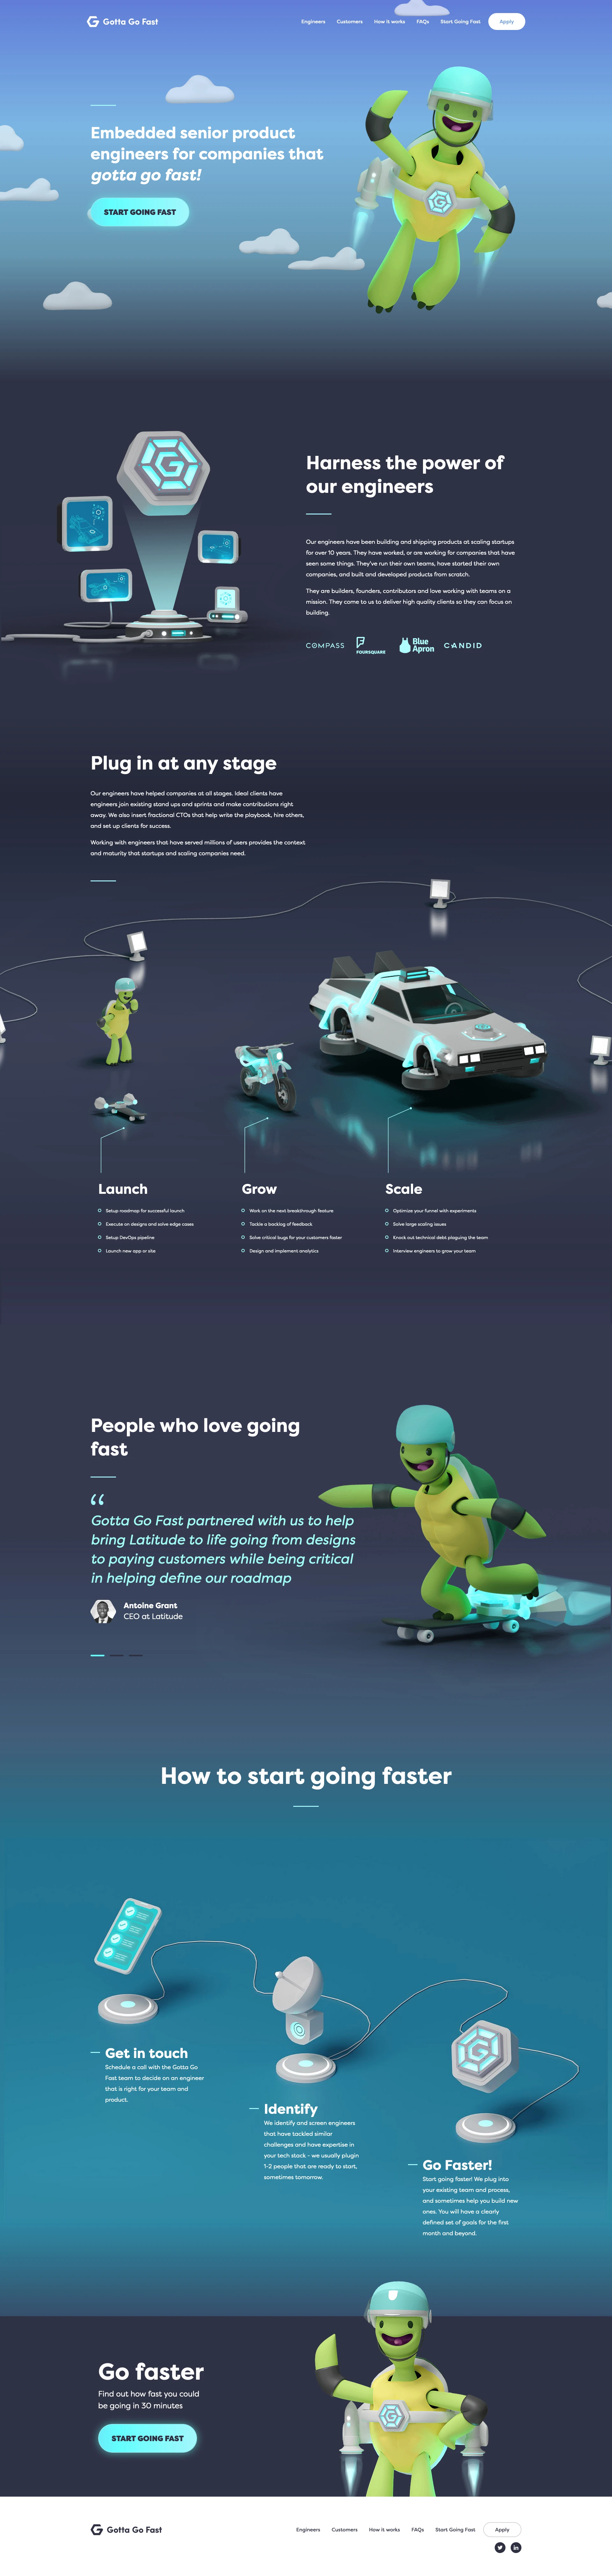 Gotta Go Fast Landing Page Example: Top product engineers for companies that gotta go fast!